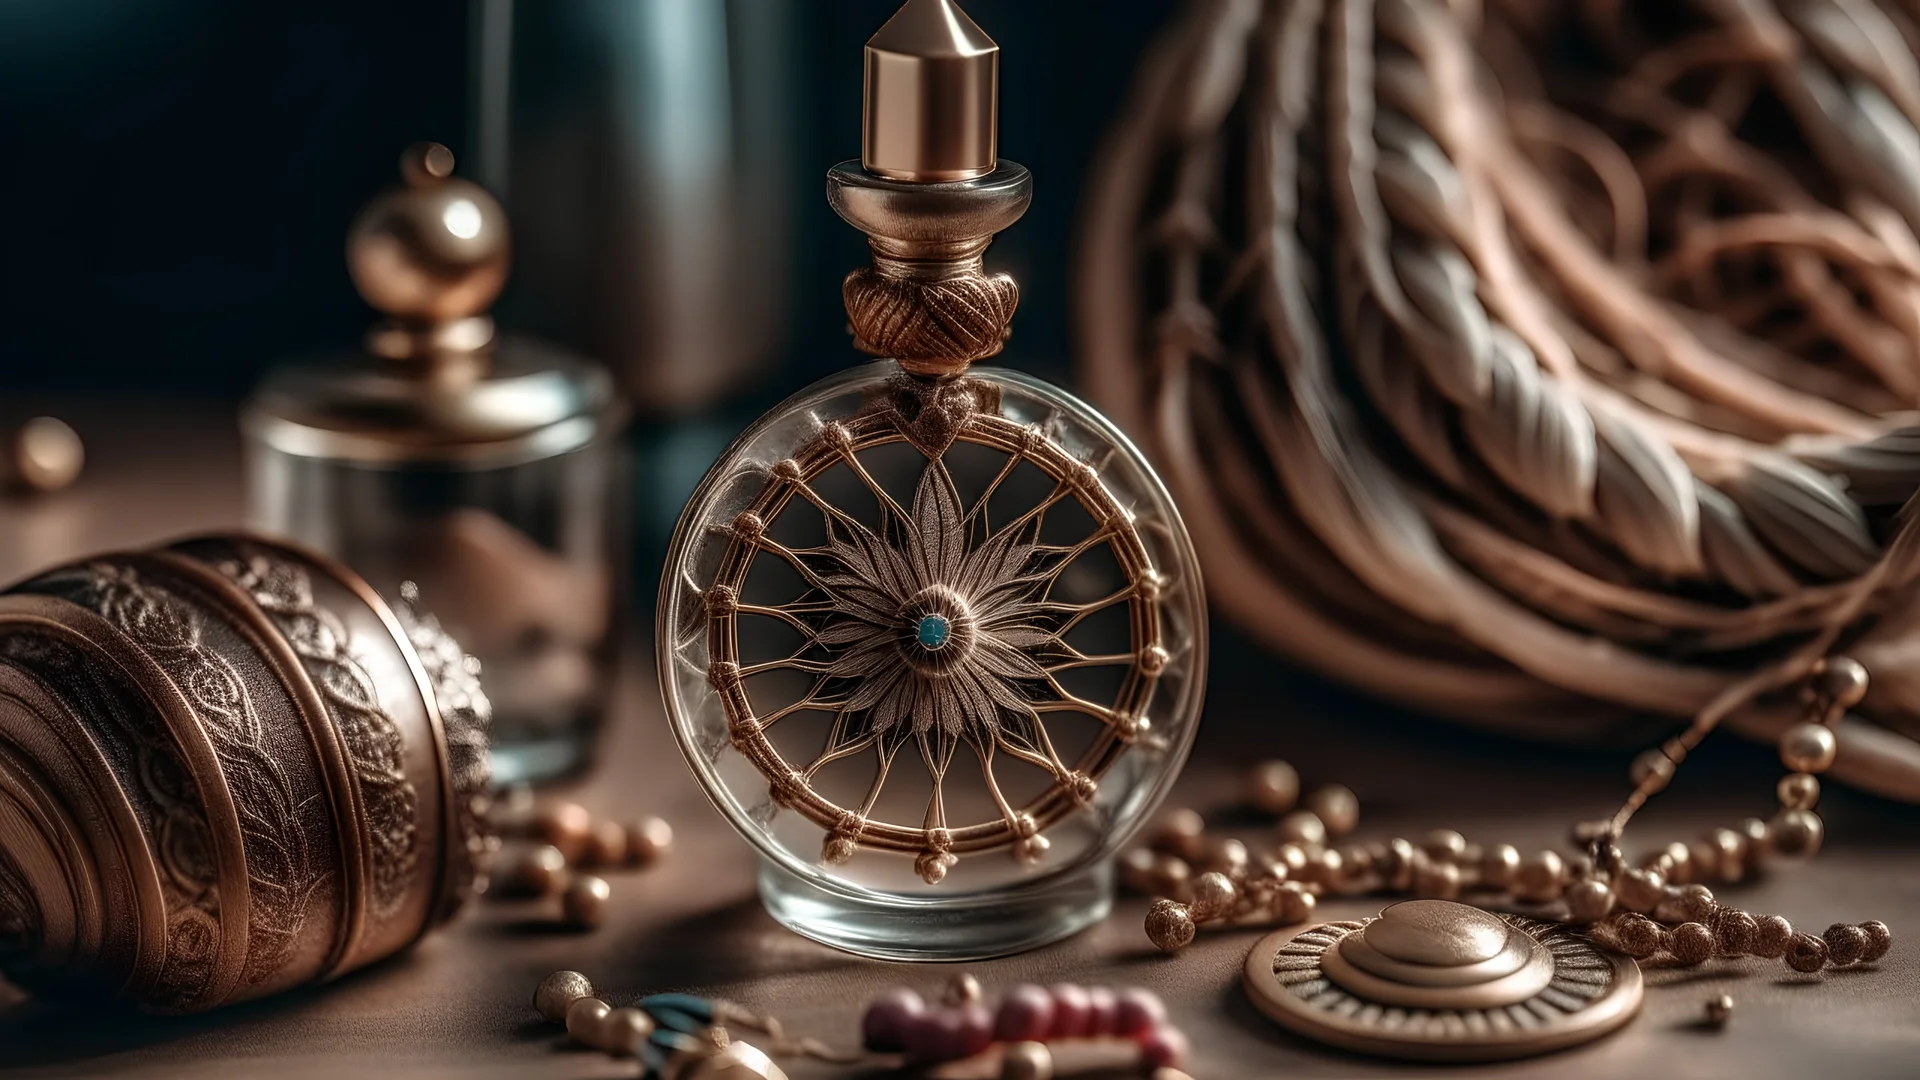 generate me an aesthetic complete image of Perfume Bottle with Bohemian Dreamcatcher